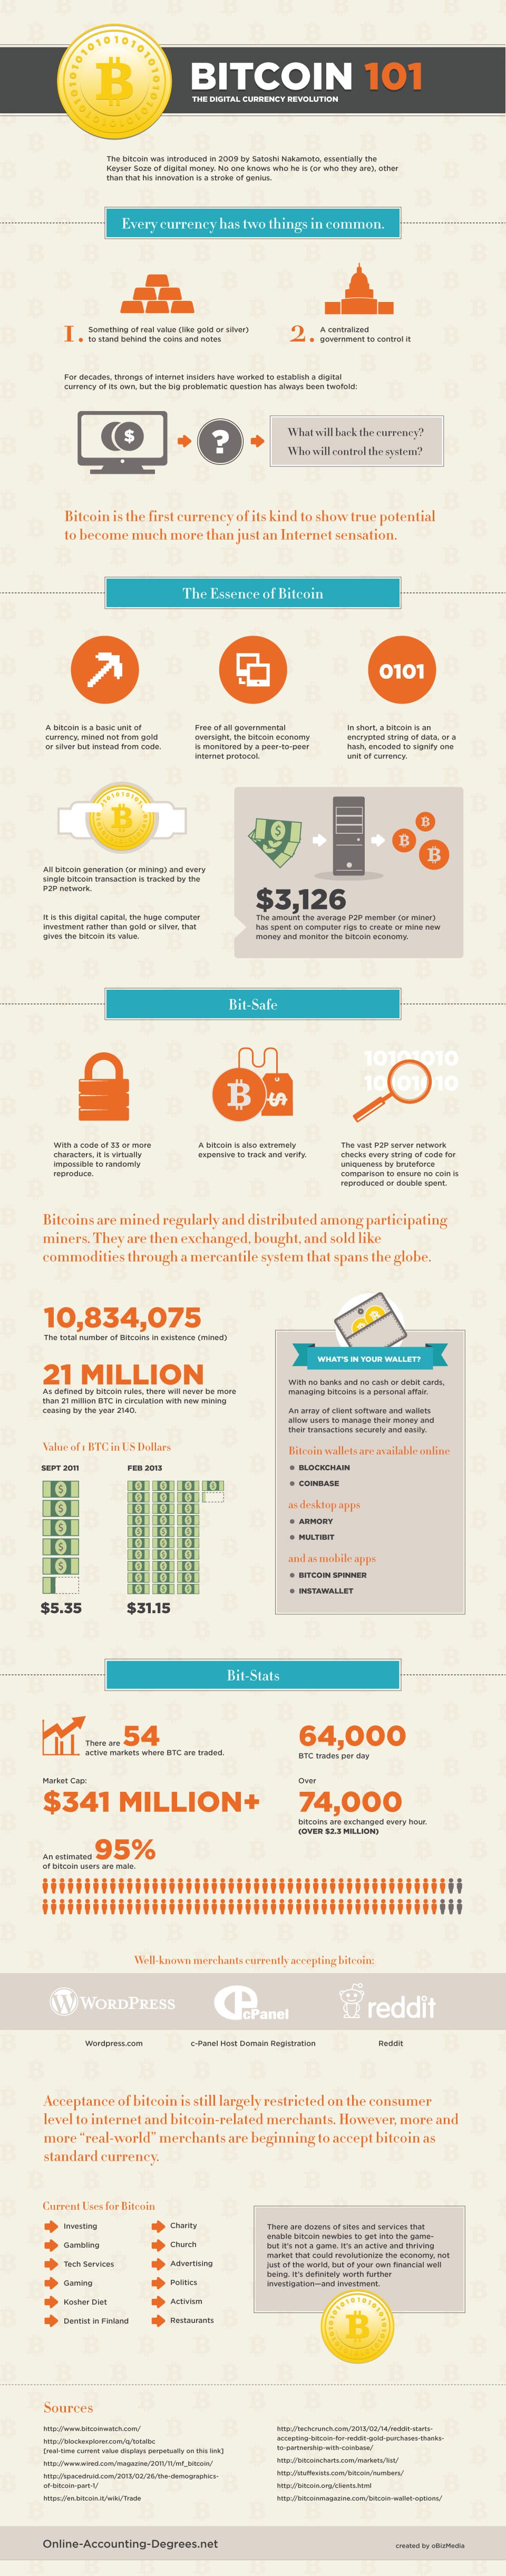 bitcoin-digital-currency-101-infographic